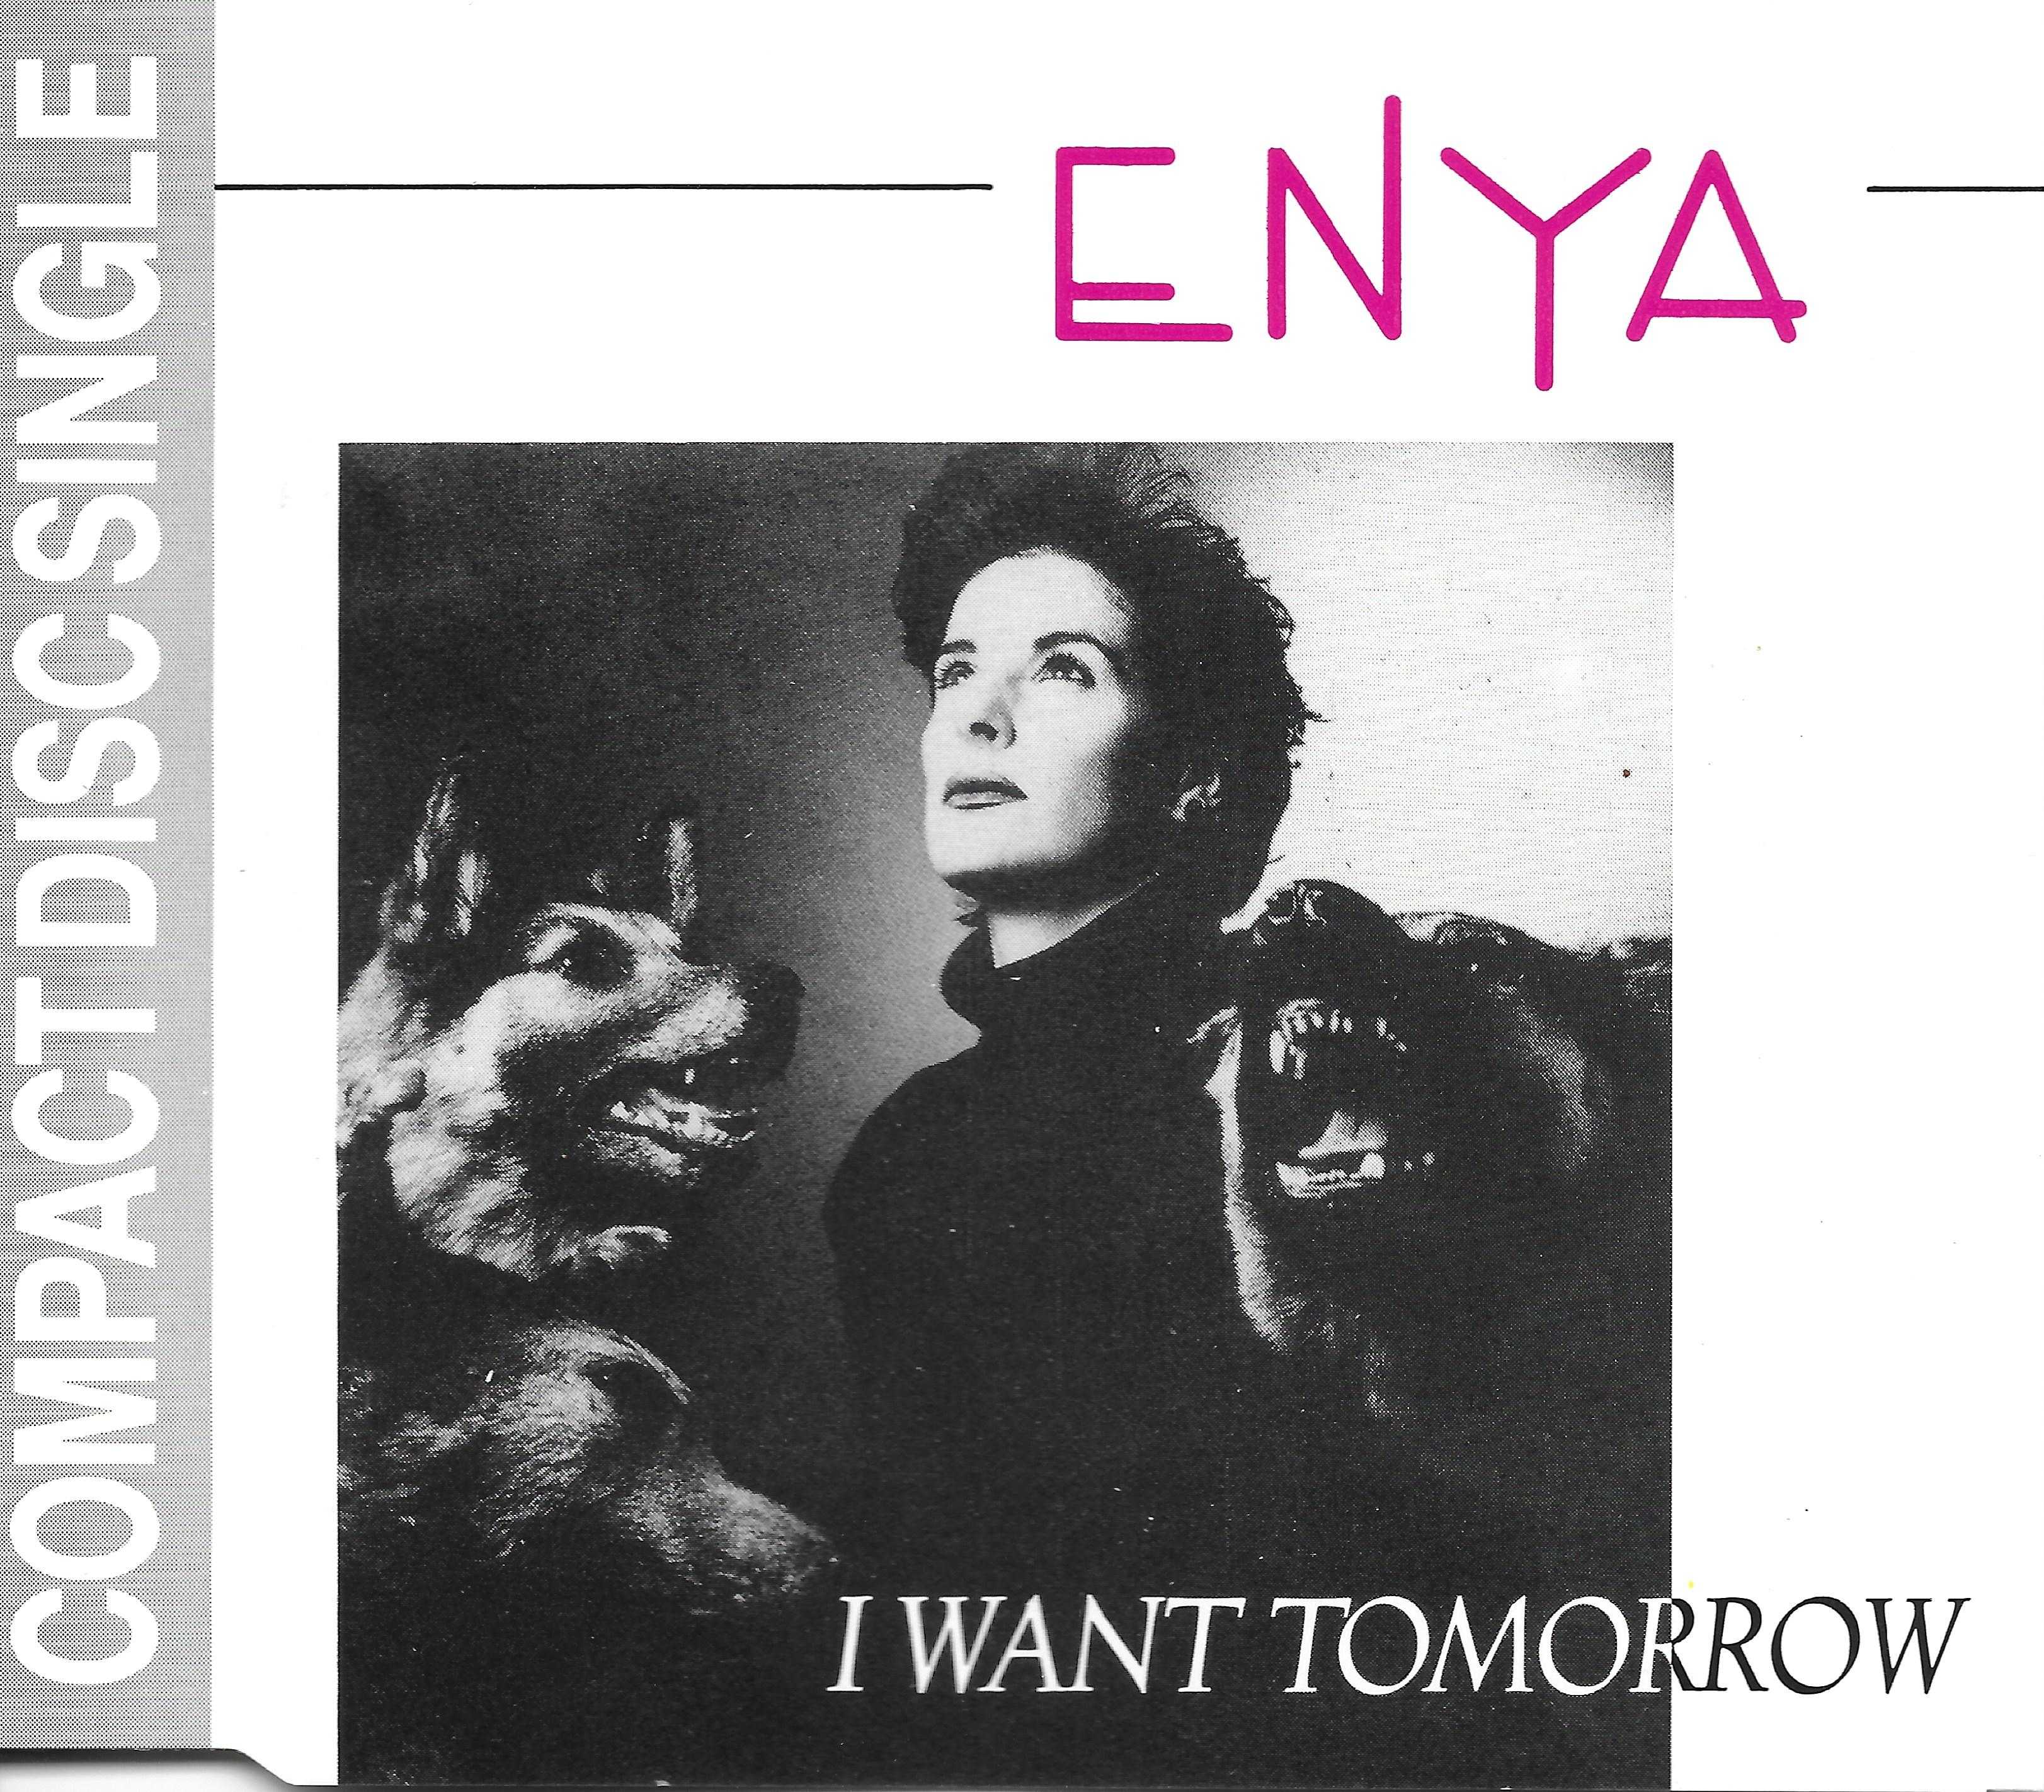 Picture of CD RSL 201 I want tomorrow (The Celts) - Dutch import by artist Enya from the BBC cdsingles - Records and Tapes library